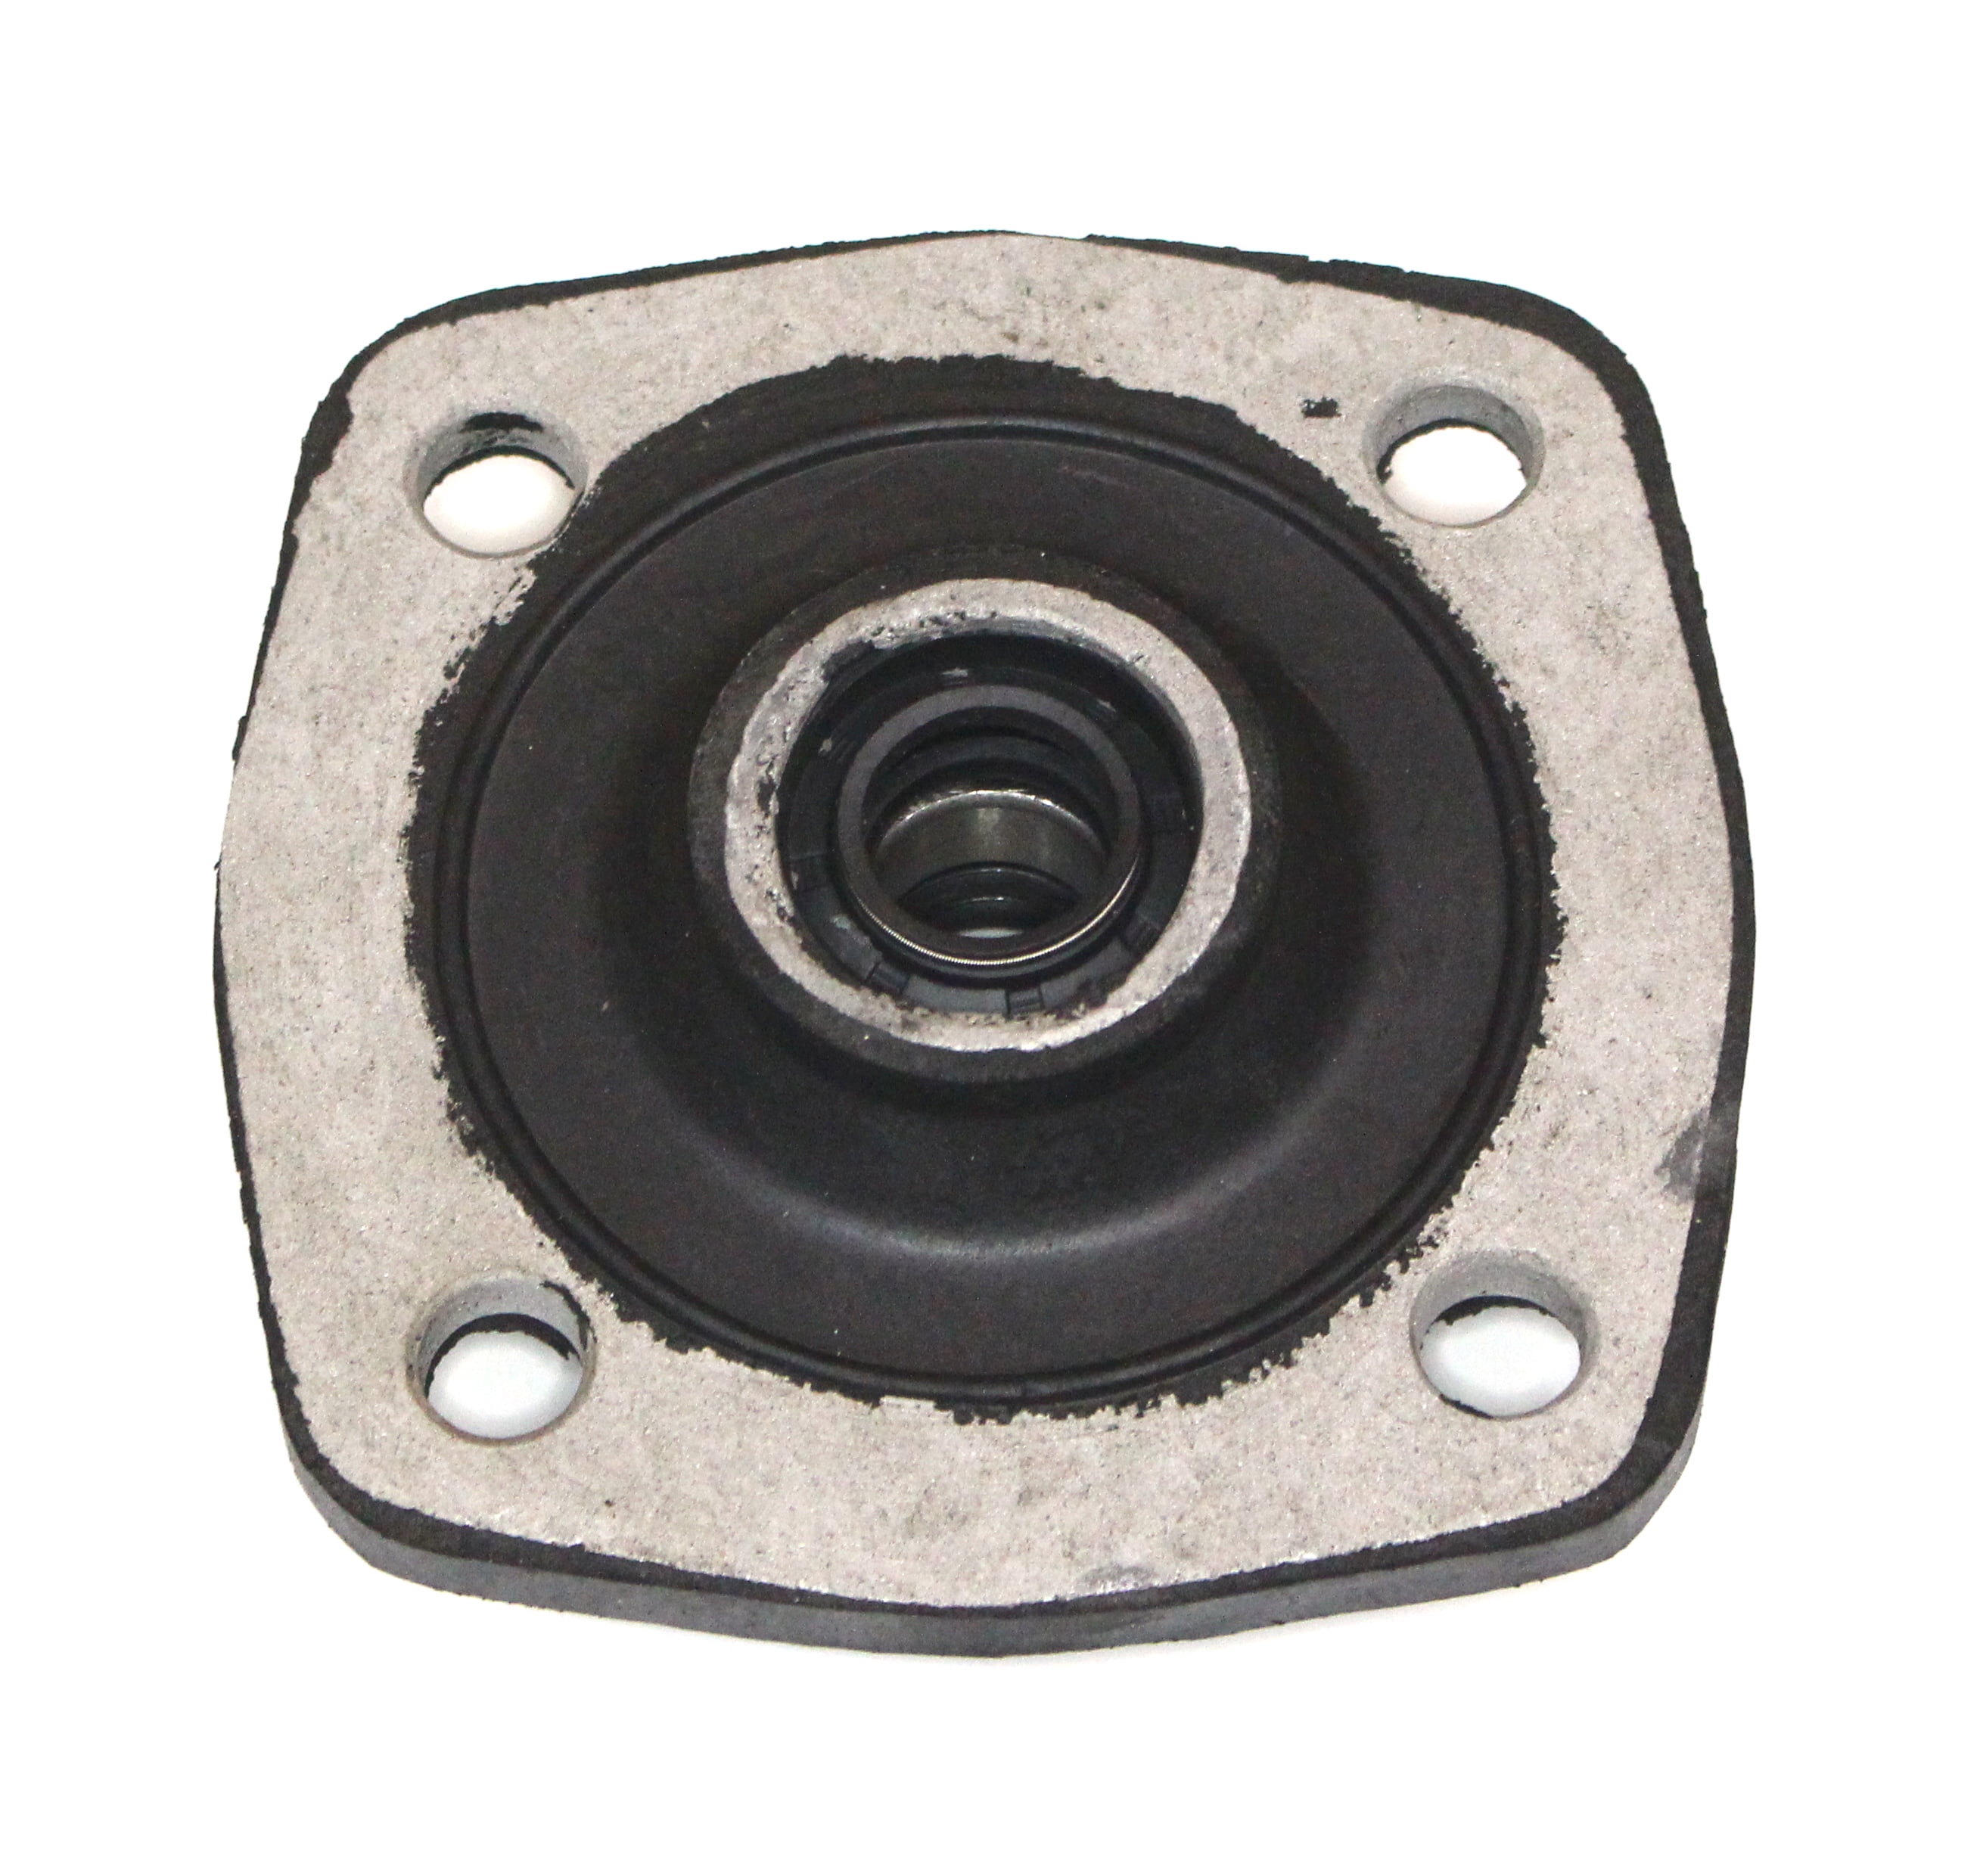 Sxr 800 Bearing Housing 003-405-01 13280-3730 13280-3756 Support Transmission 